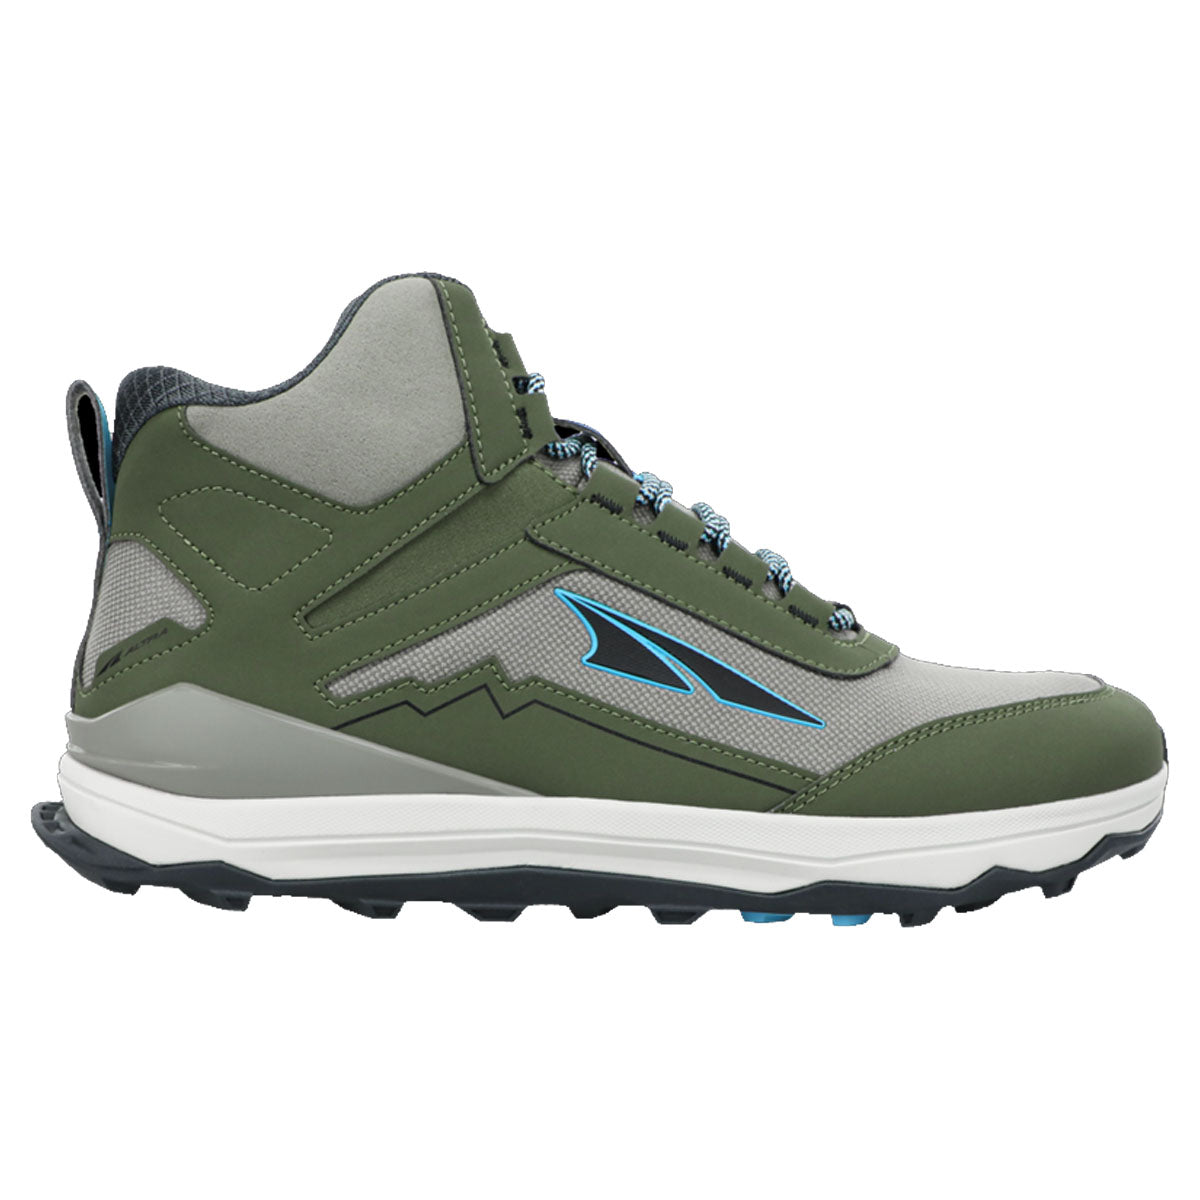 Altra Lone Peak Hiker in Dusty Olive by GOHUNT | Altra - GOHUNT Shop